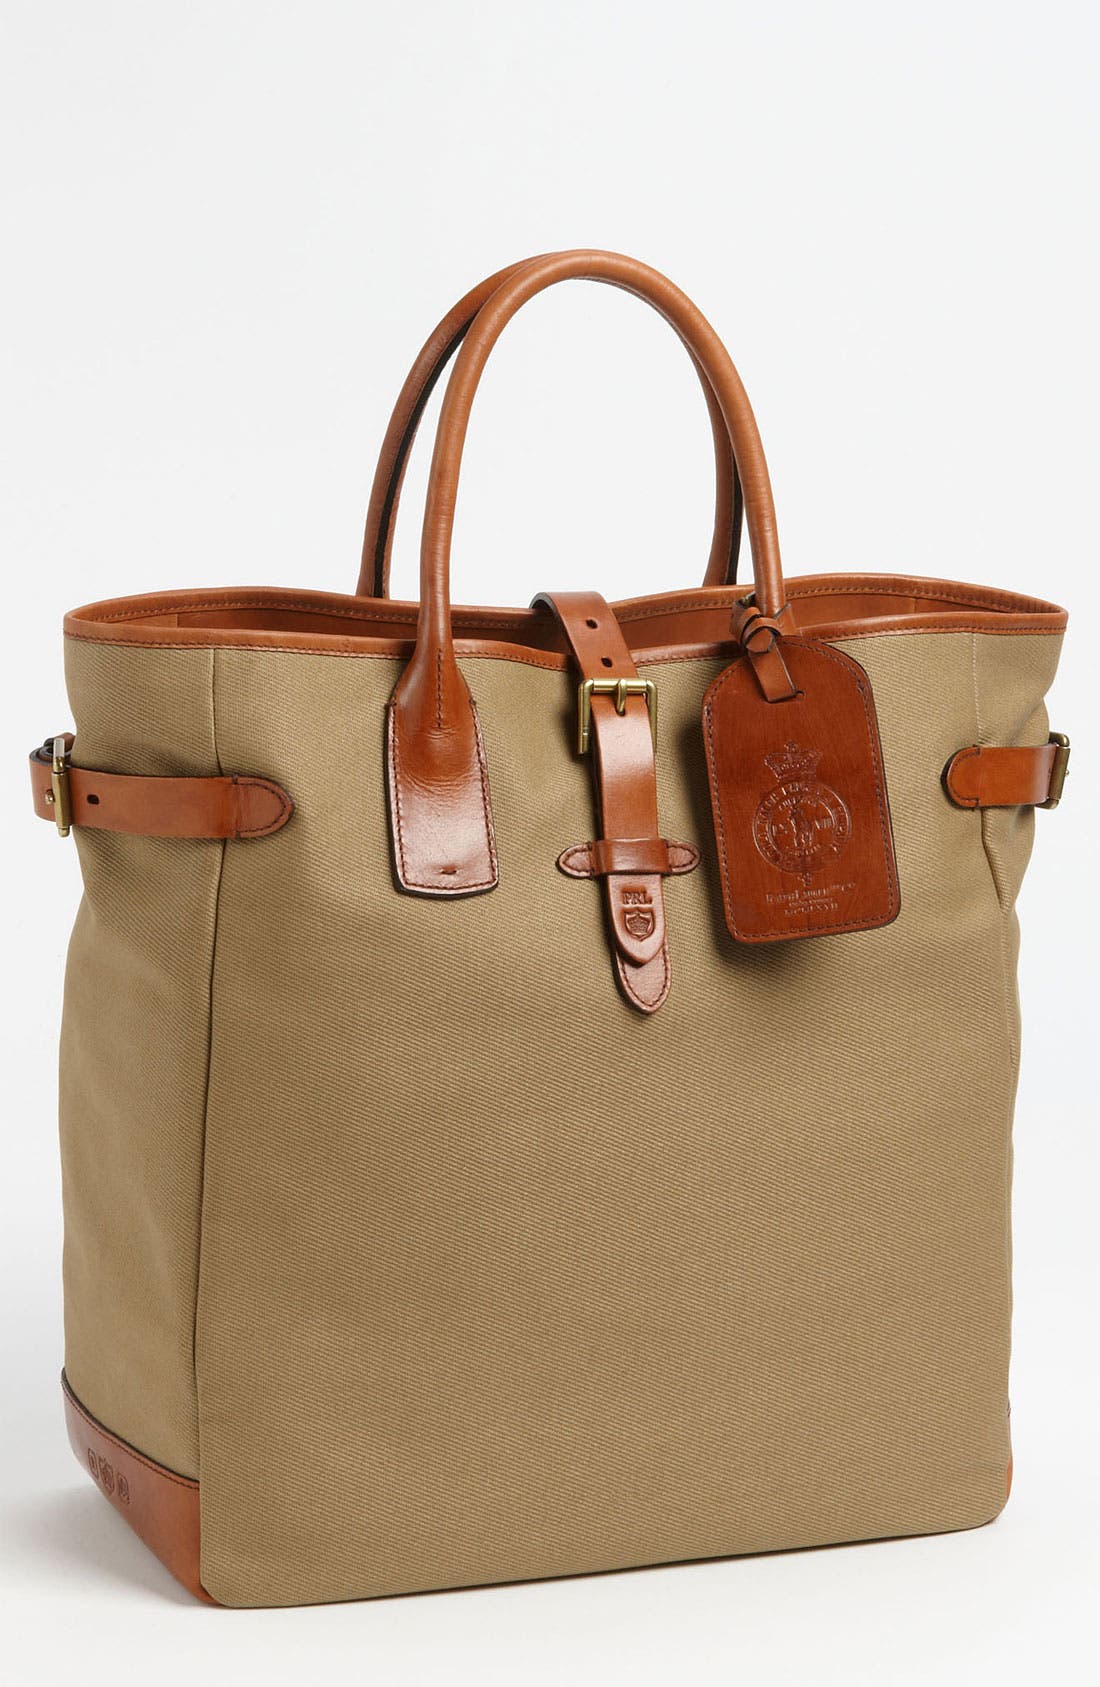 polo tote canvas bags